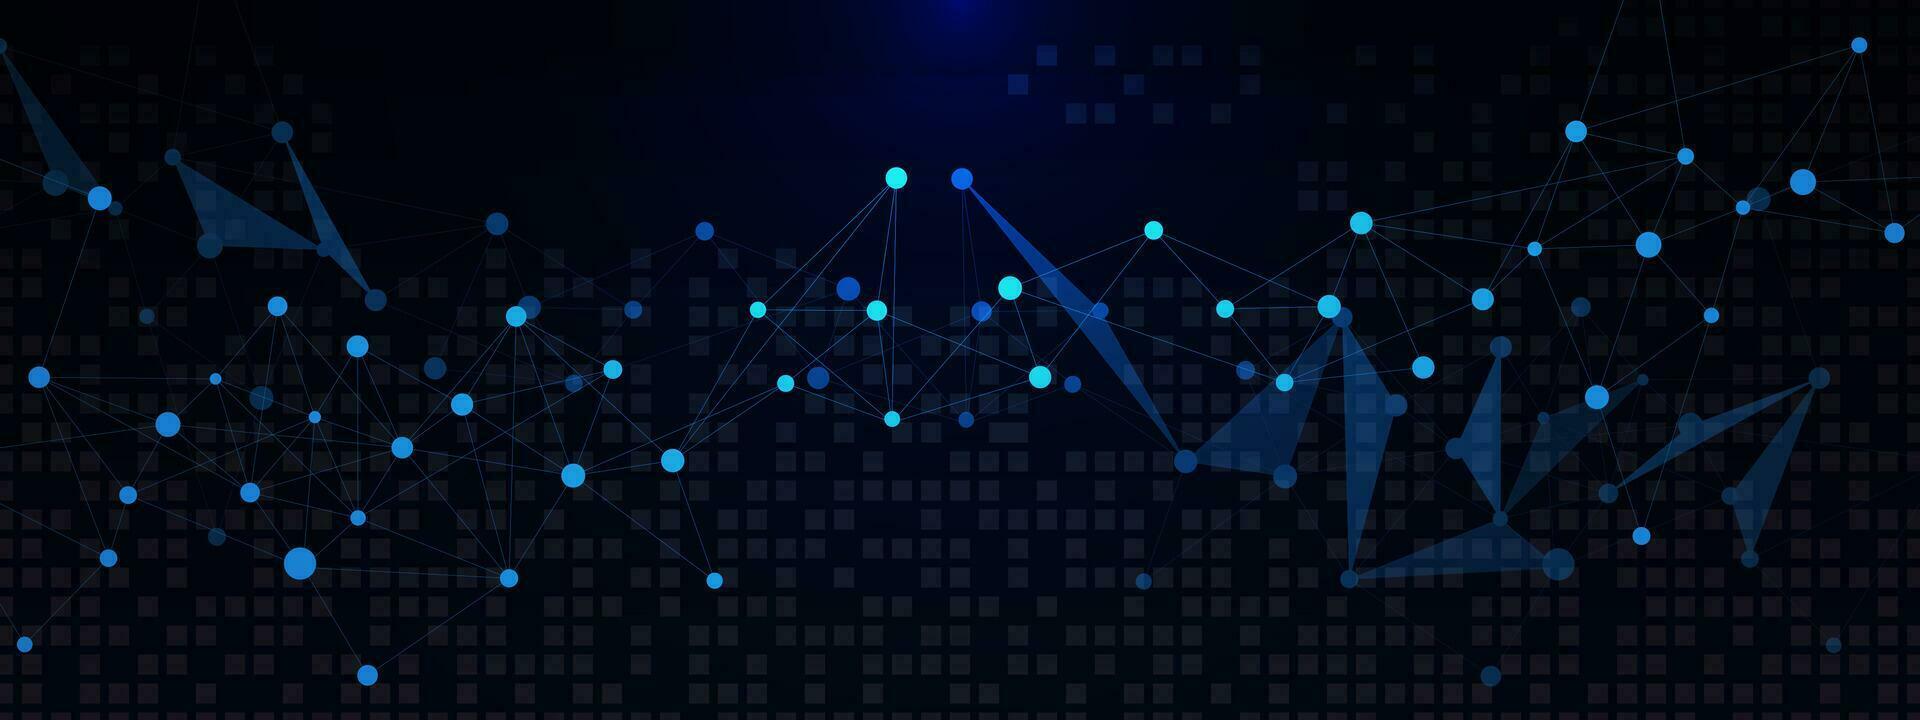 Abstract polygonal background with connecting dots and lines. Digital technology with plexus. Global network connection and communication concept. Vector illustration.